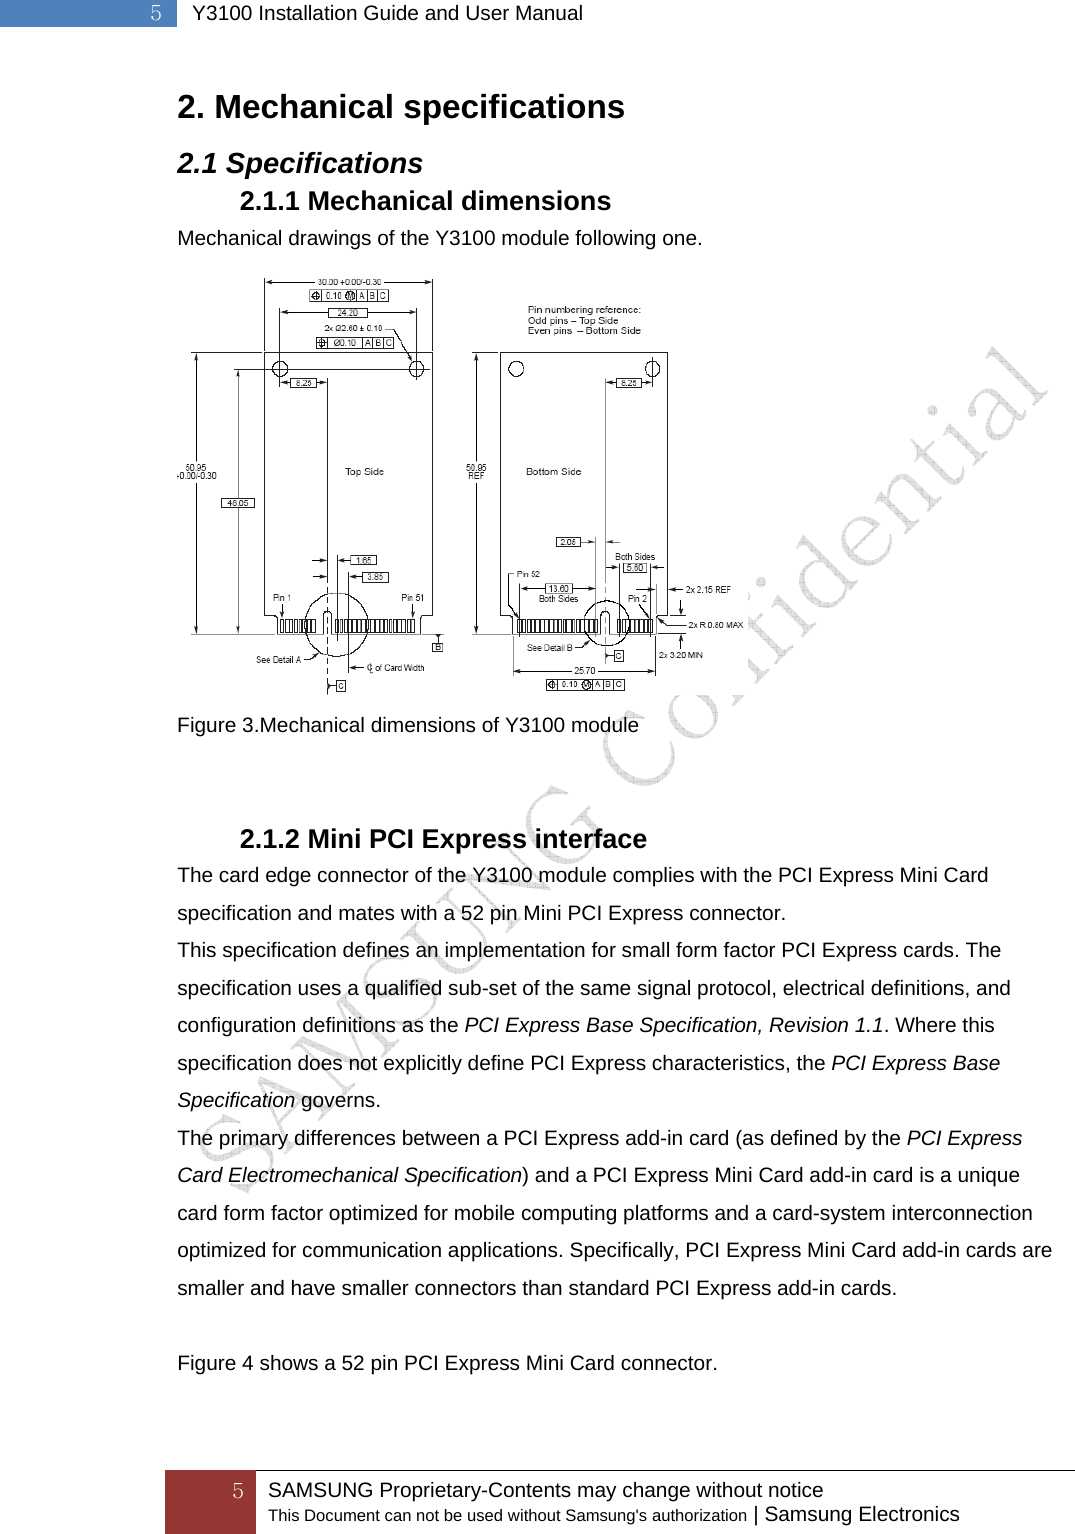  5 SAMSUNG Proprietary-Contents may change without notice This Document can not be used without Samsung&apos;s authorization | Samsung Electronics  5  Y3100 Installation Guide and User Manual 2. Mechanical specifications 2.1 Specifications 2.1.1 Mechanical dimensions Mechanical drawings of the Y3100 module following one.  Figure 3.Mechanical dimensions of Y3100 module   2.1.2 Mini PCI Express interface The card edge connector of the Y3100 module complies with the PCI Express Mini Card specification and mates with a 52 pin Mini PCI Express connector. This specification defines an implementation for small form factor PCI Express cards. The   specification uses a qualified sub-set of the same signal protocol, electrical definitions, and   configuration definitions as the PCI Express Base Specification, Revision 1.1. Where this specification does not explicitly define PCI Express characteristics, the PCI Express Base Specification governs. The primary differences between a PCI Express add-in card (as defined by the PCI Express Card Electromechanical Specification) and a PCI Express Mini Card add-in card is a unique card form factor optimized for mobile computing platforms and a card-system interconnection optimized for communication applications. Specifically, PCI Express Mini Card add-in cards are smaller and have smaller connectors than standard PCI Express add-in cards.  Figure 4 shows a 52 pin PCI Express Mini Card connector. 